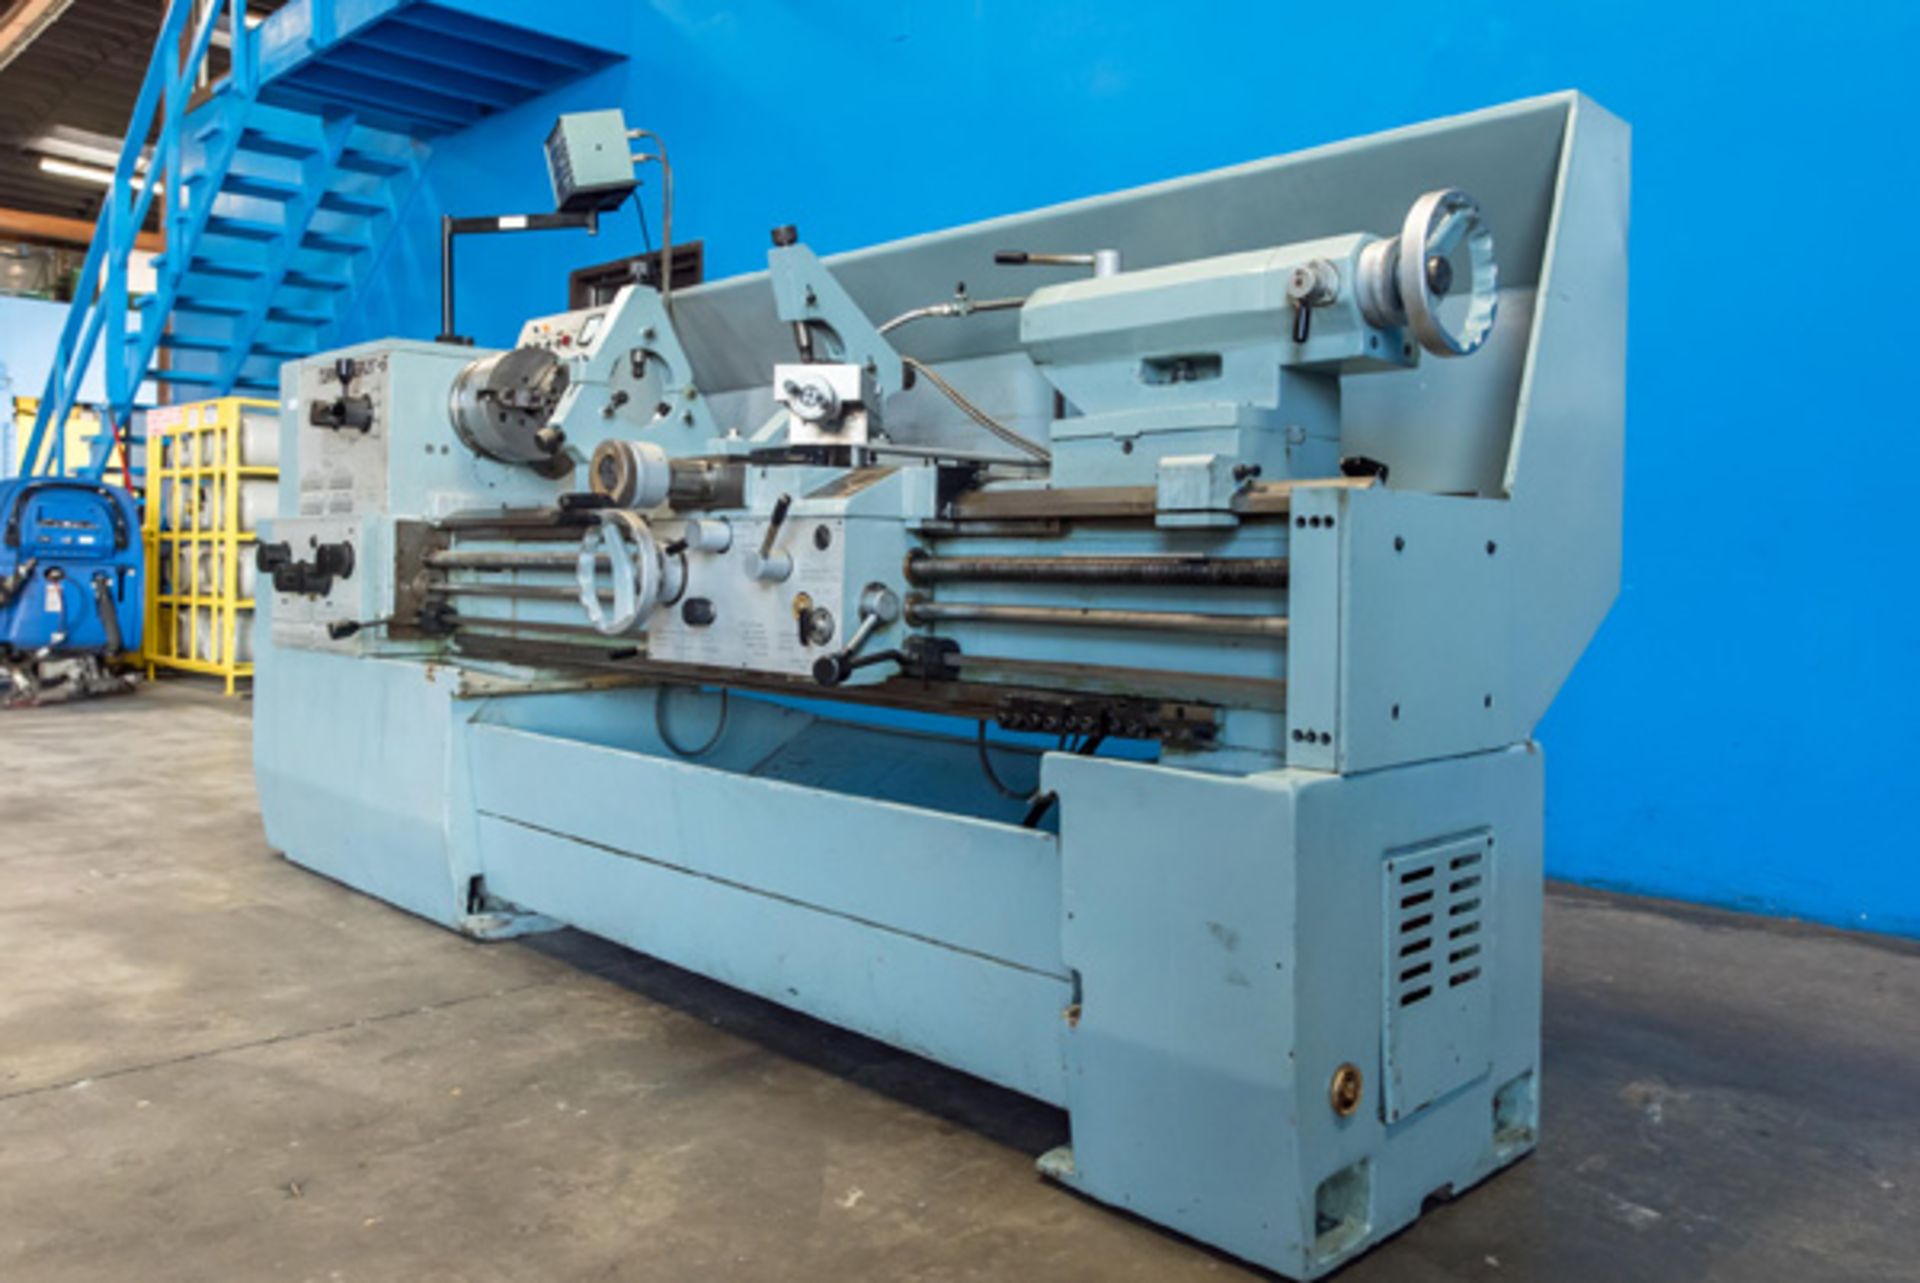 1991 Turnmaster Engine Lathe, 21"/29" x 70", Mdl: 21 S, S/N: 1991193, Located In: Huntington Park, - Image 2 of 16